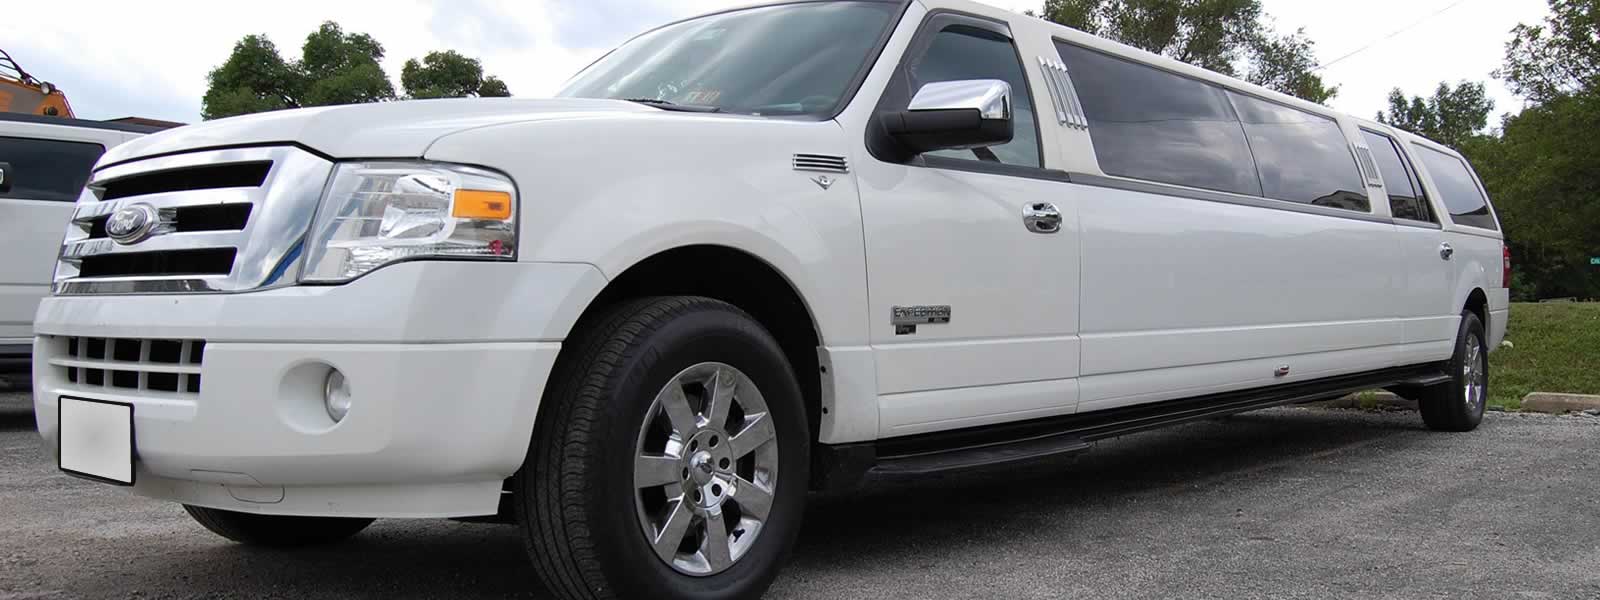 Ford Expedition Stretch Limo Hire - 8 passenger model